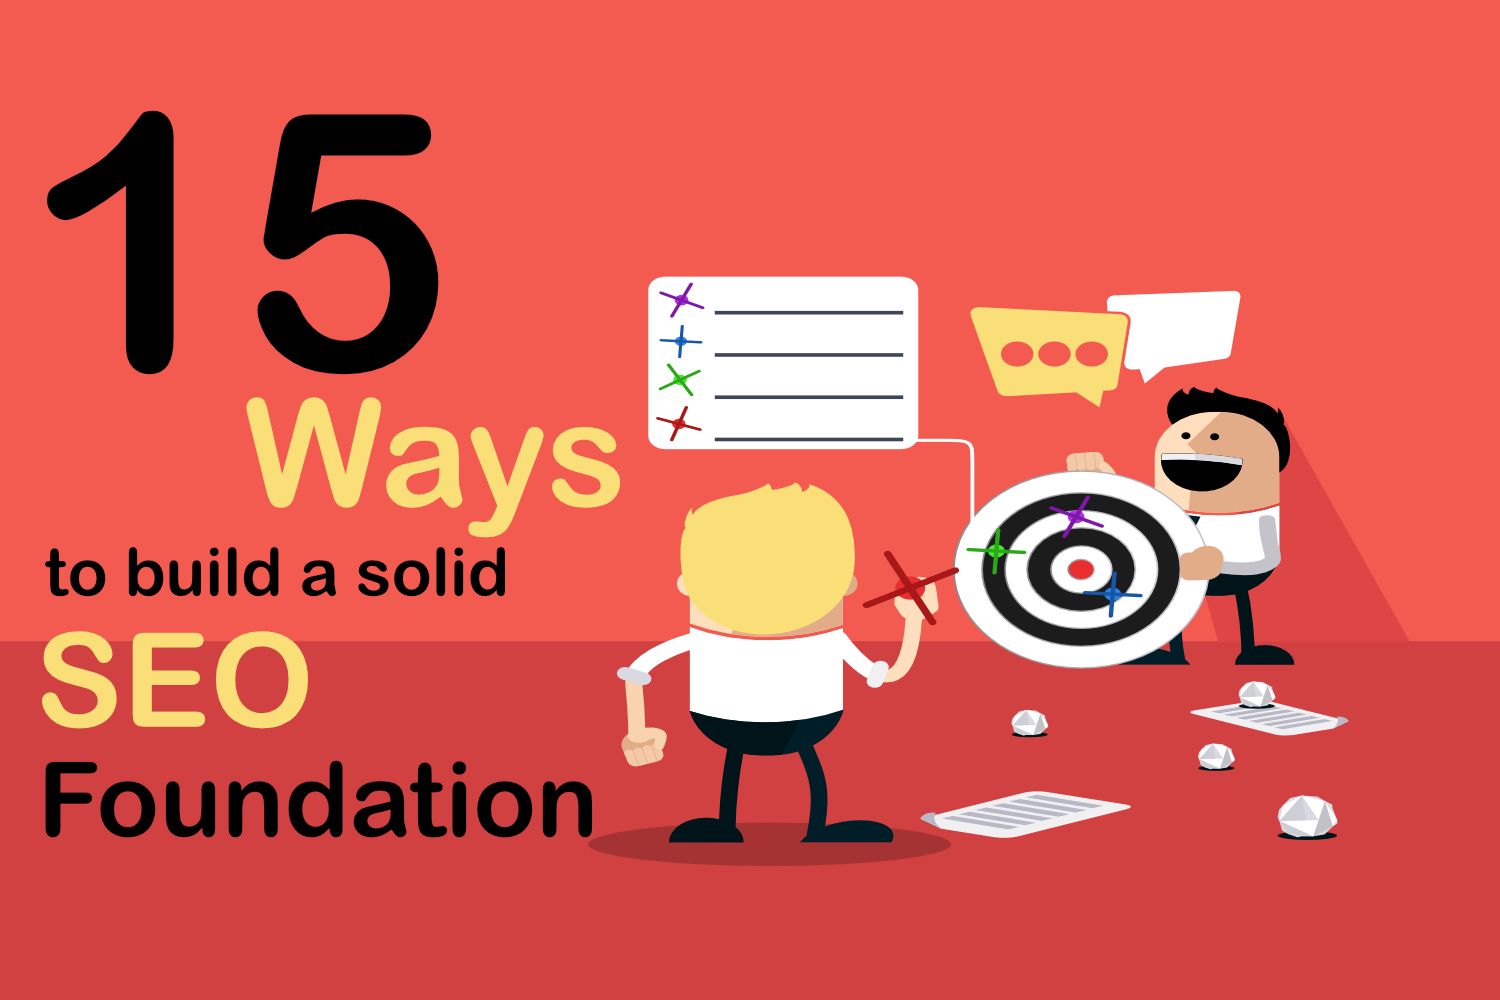 15 Ways to Build a Solid SEO Foundation